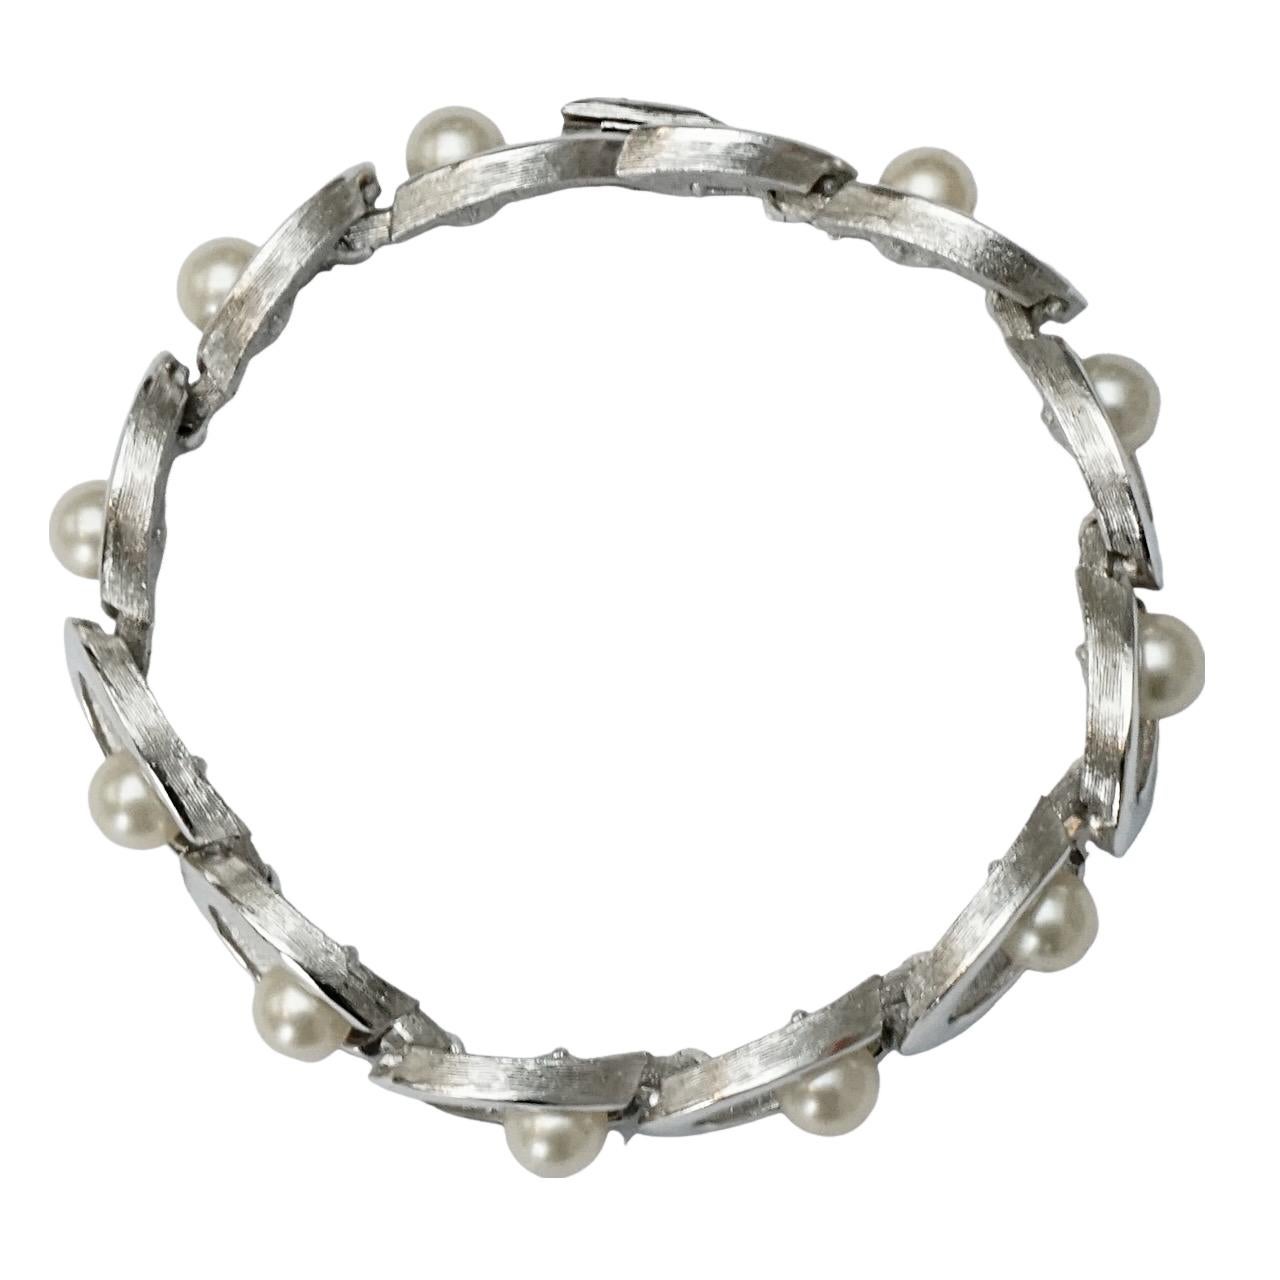 Trifari Silver Plated Brushed and Shiny Bracelet with Faux Pearls circa 1960s For Sale 2